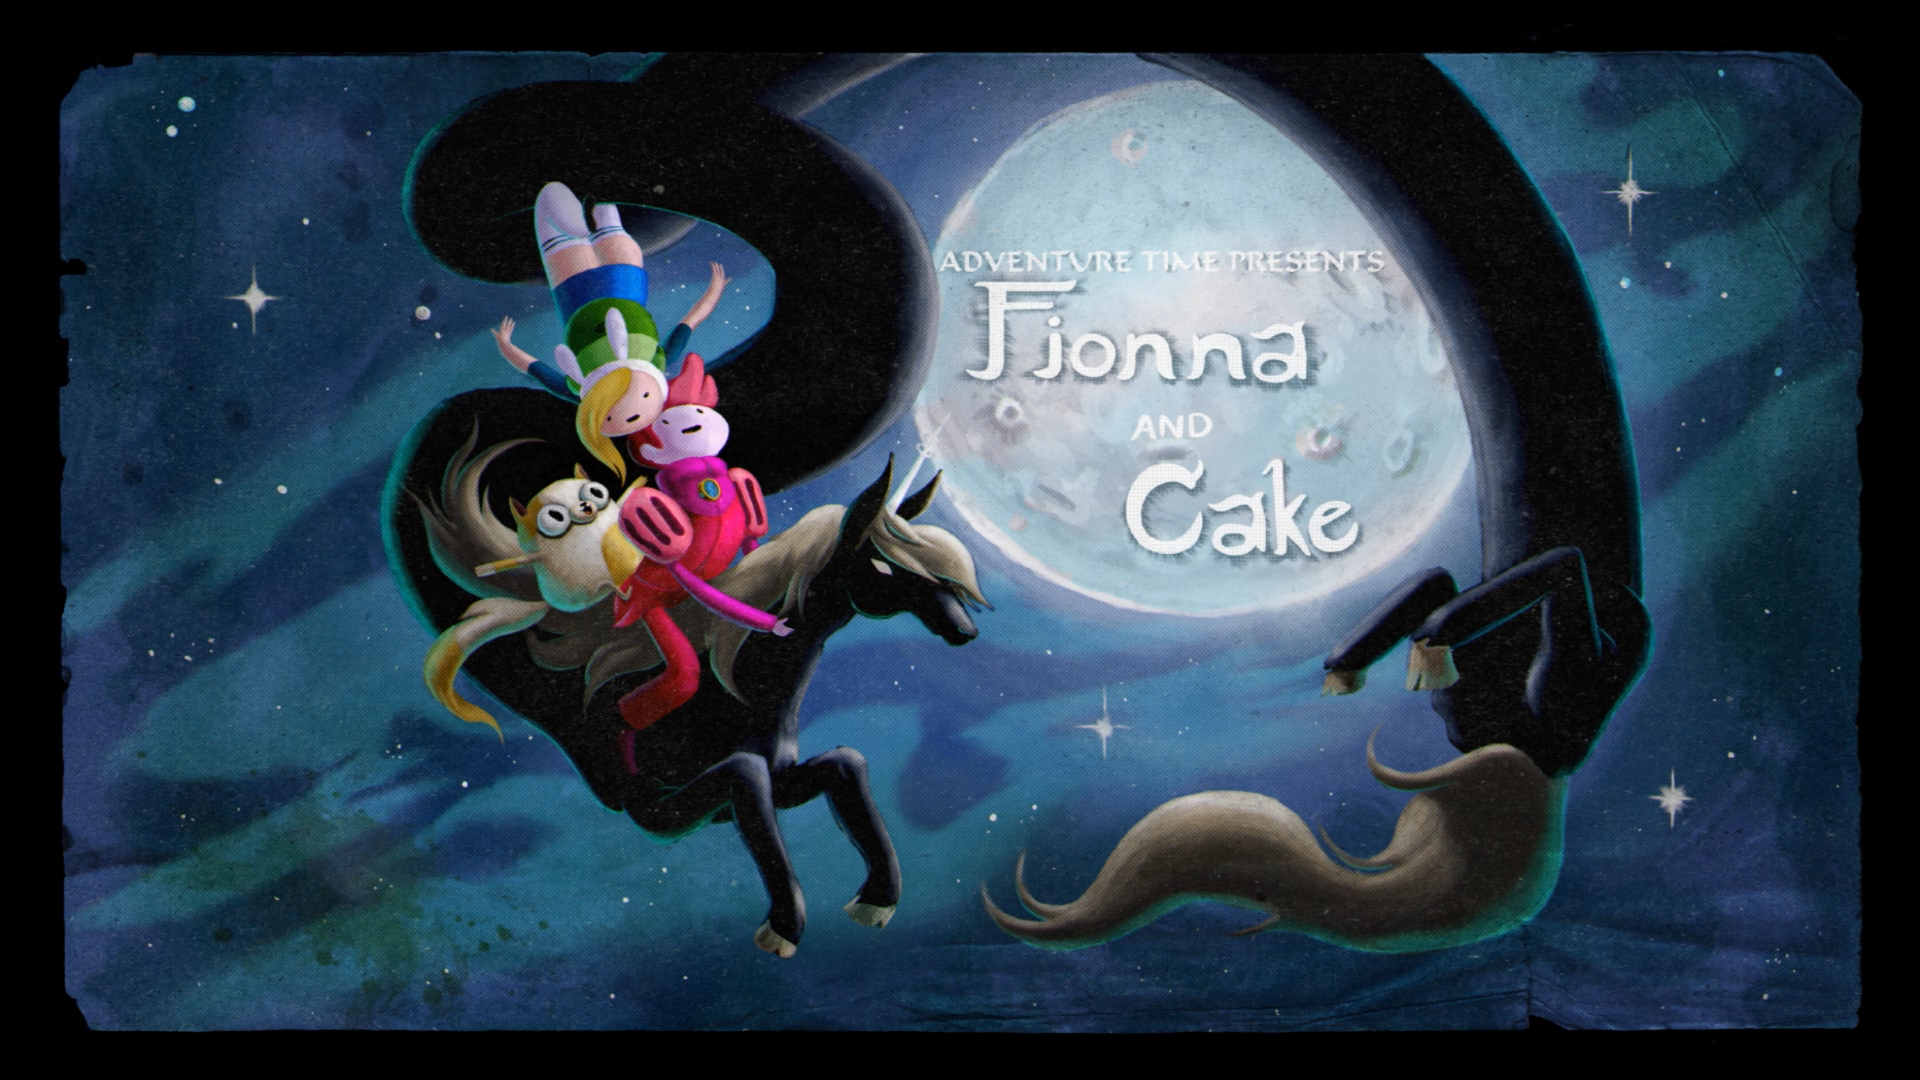 HBO Max orders 'Adventure Time' series about Fionna and Cake - Los